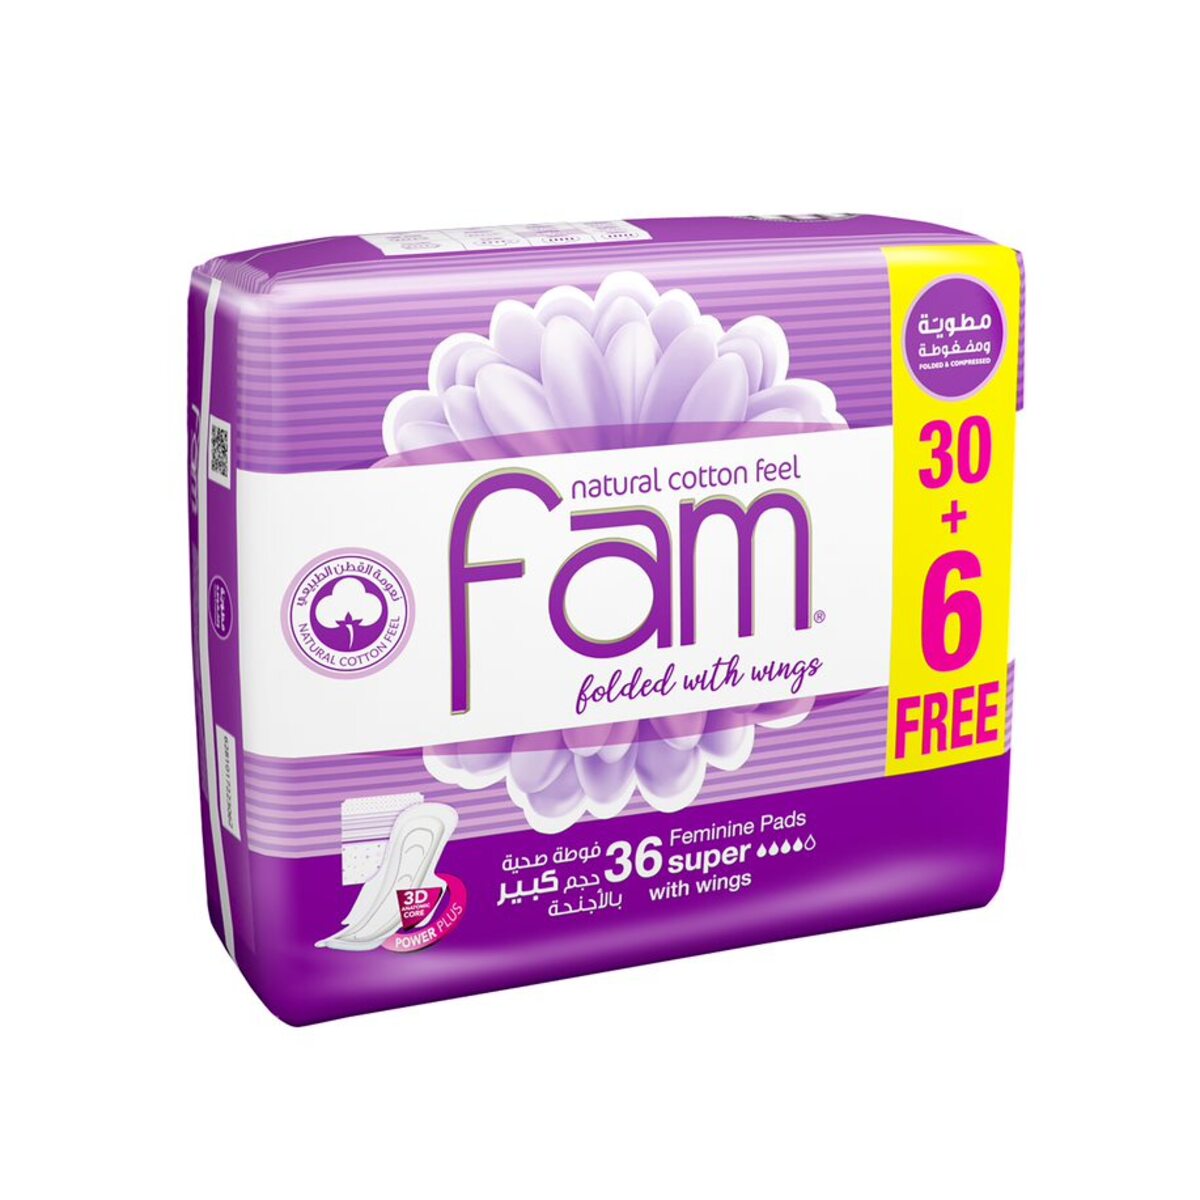 Fam Natural Cotton Feel Super Folded with Wings Feminine Pads 30+6